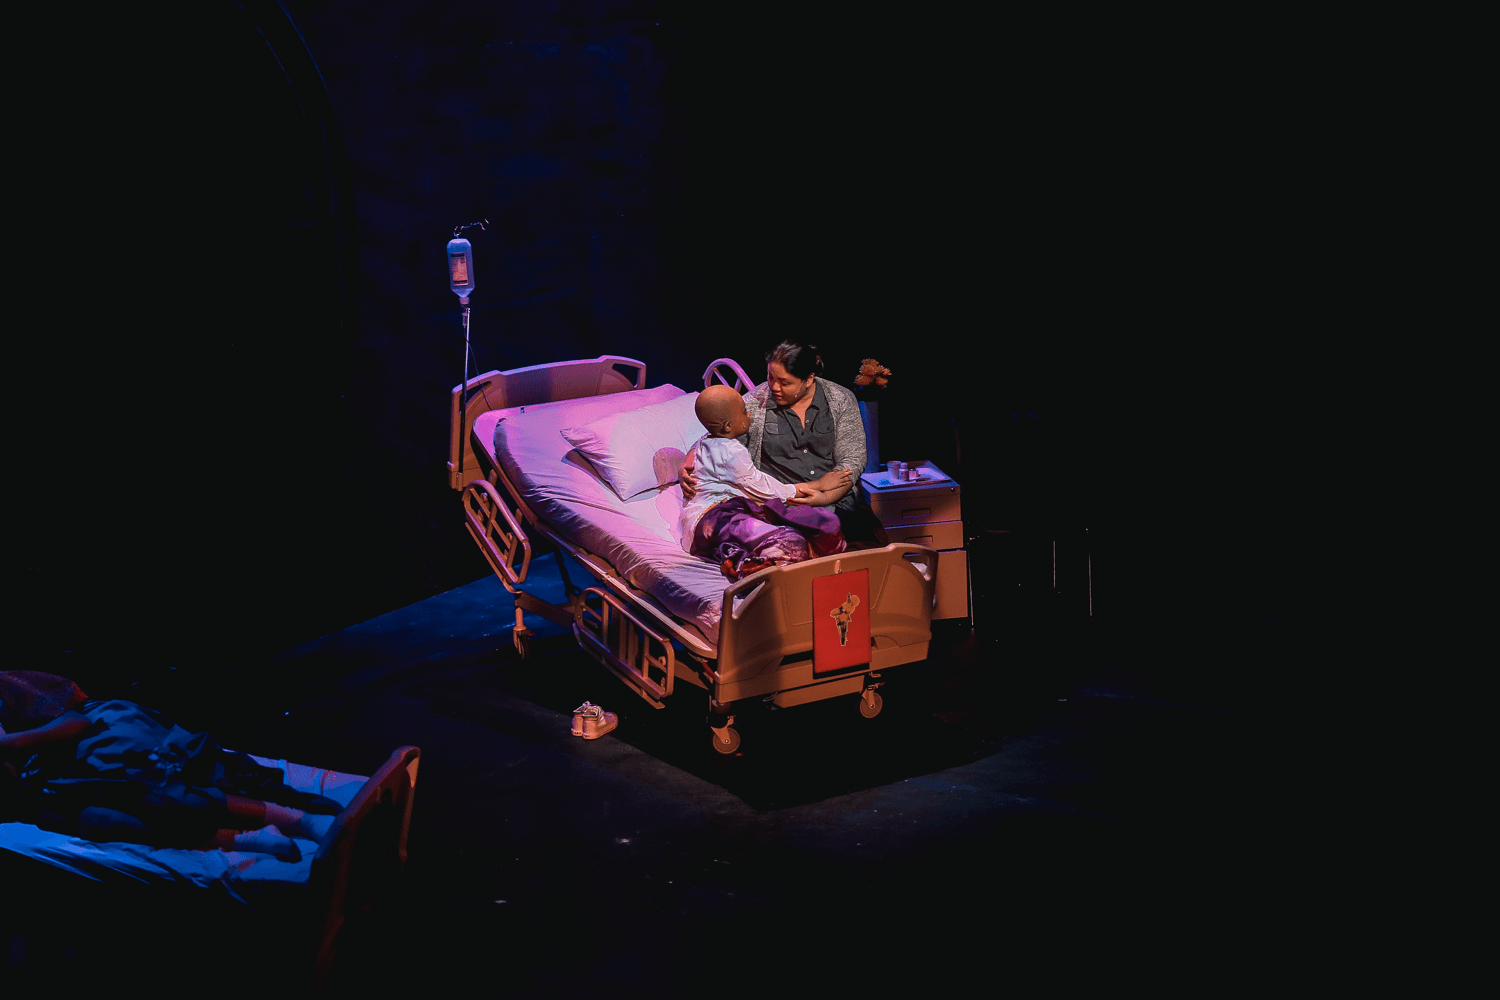 PRAY, PLAY. Katharine, played by Pamela Imperial, urges her cancer-stricken daughter Dani, played by Felicity Kyle Napuli, to pray for recovery. A scene from Dani Girl: A Musical About Hope. Photo courtesy of Gian Nicdao/The Sandbox Collective 